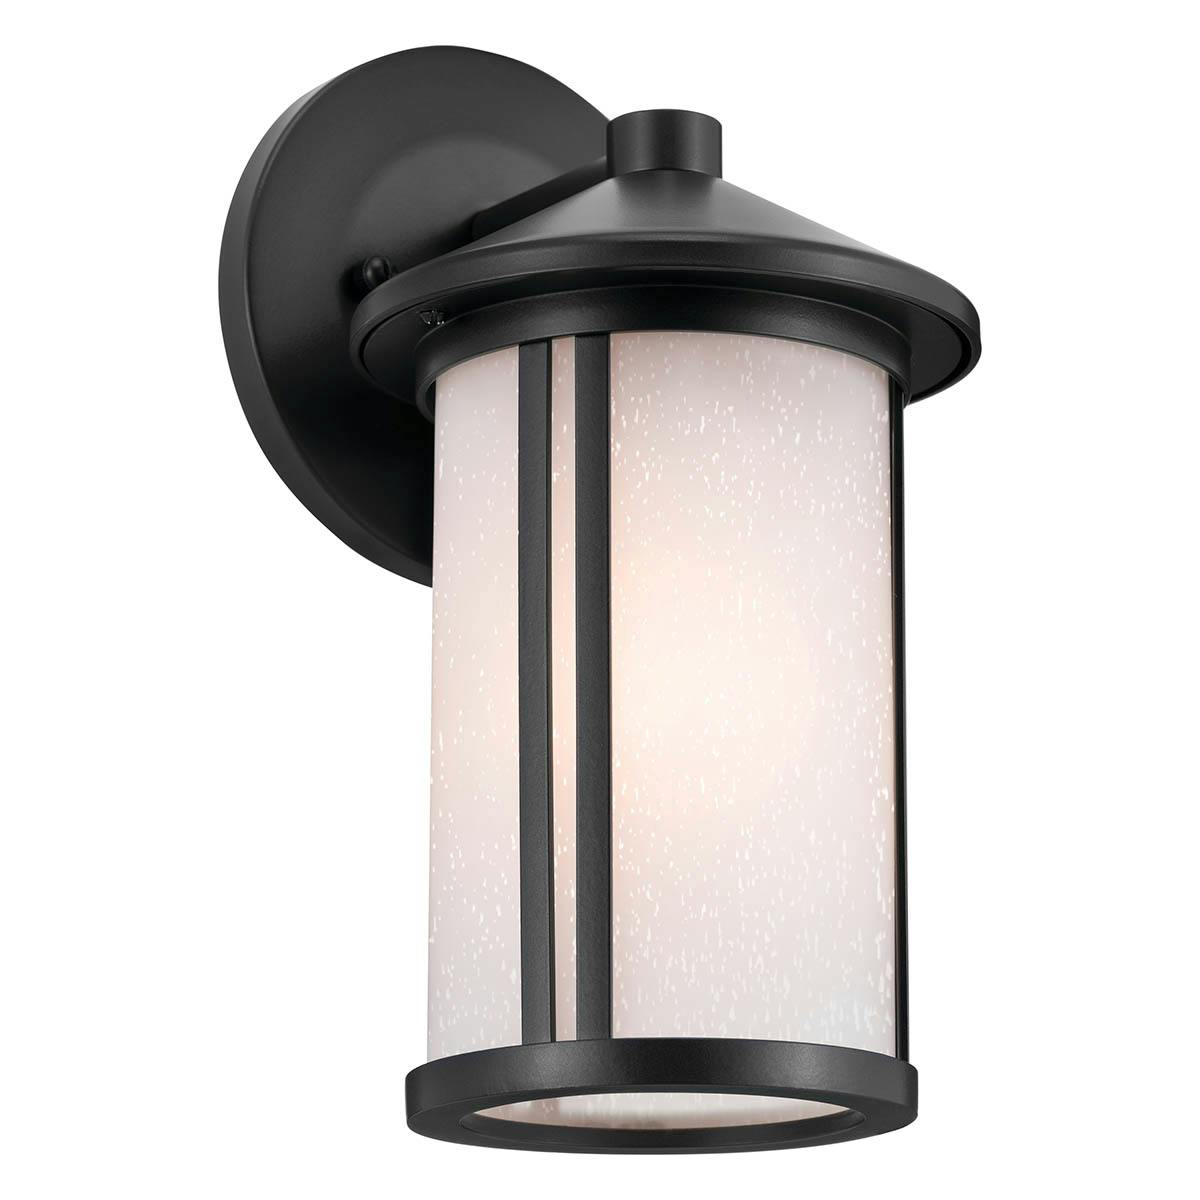 Lombard 10.5" 1 Light Wall Light Black on a white background